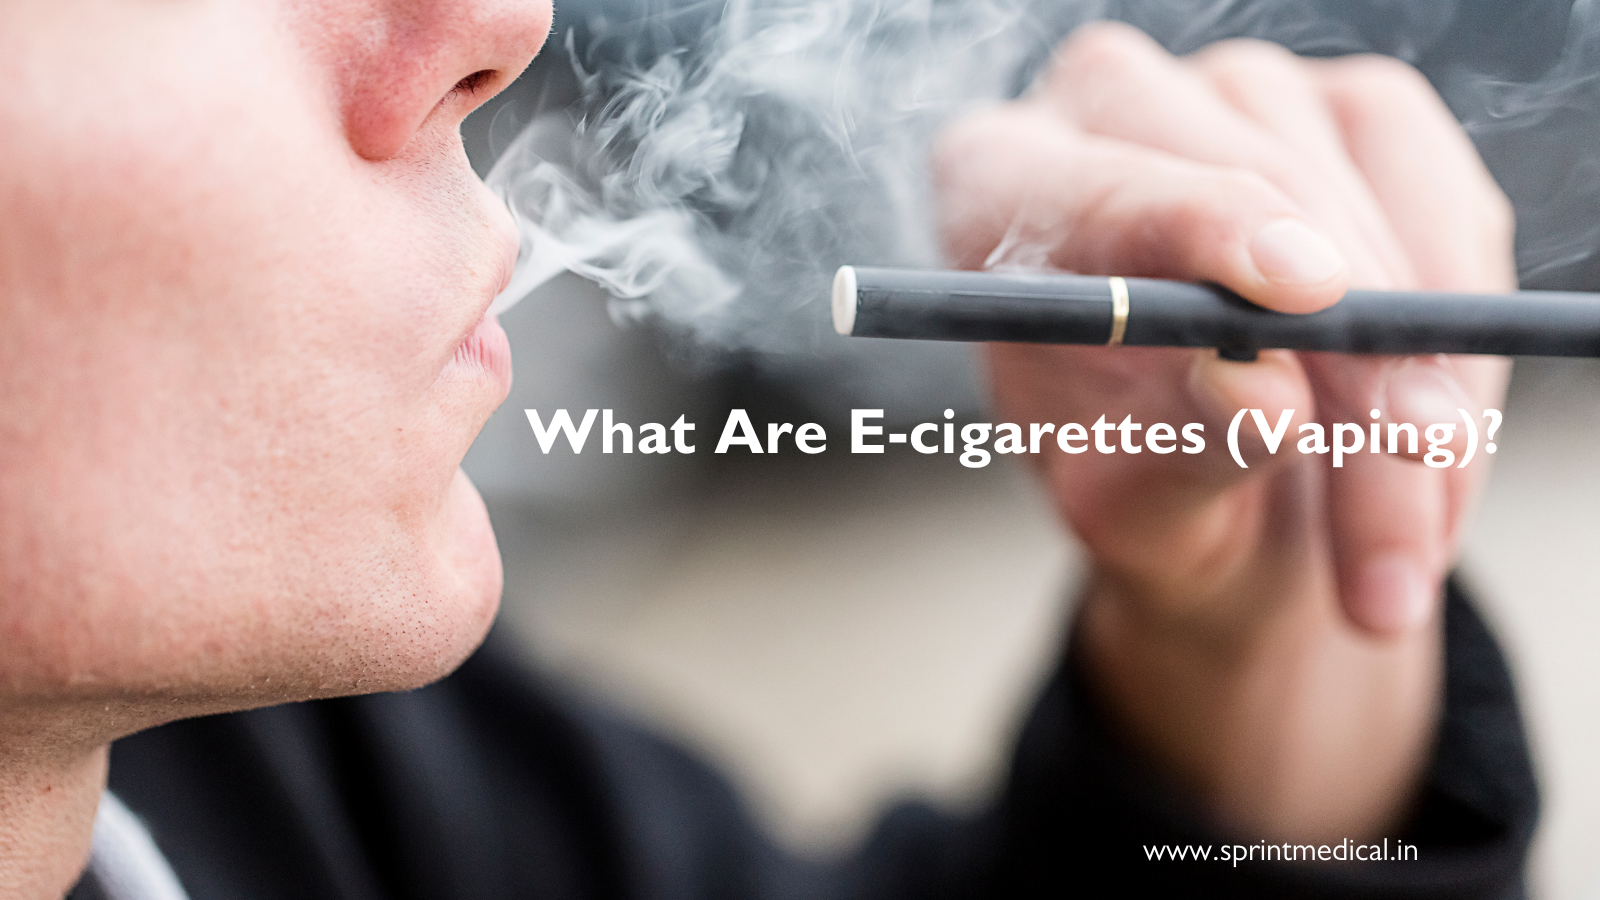 What Are E-cigarettes (Vaping)?